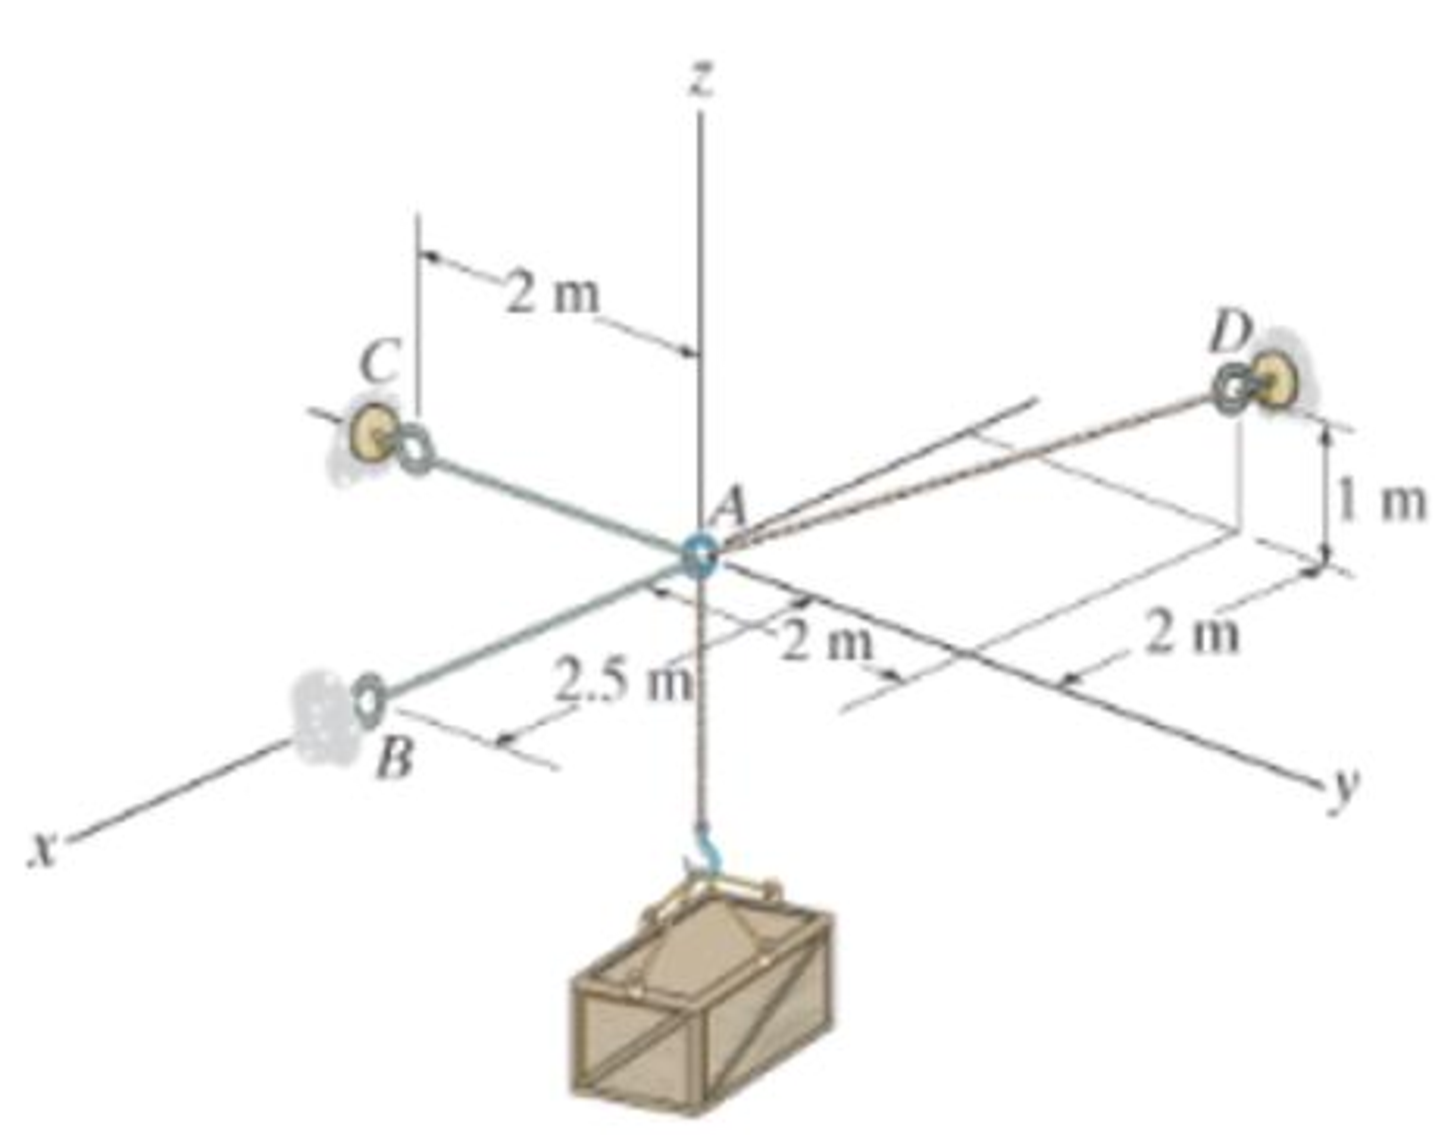 Chapter 3.4, Problem 48P, Determine the tension in the cables in order to support the 100-kg crate in the equilibrium position 